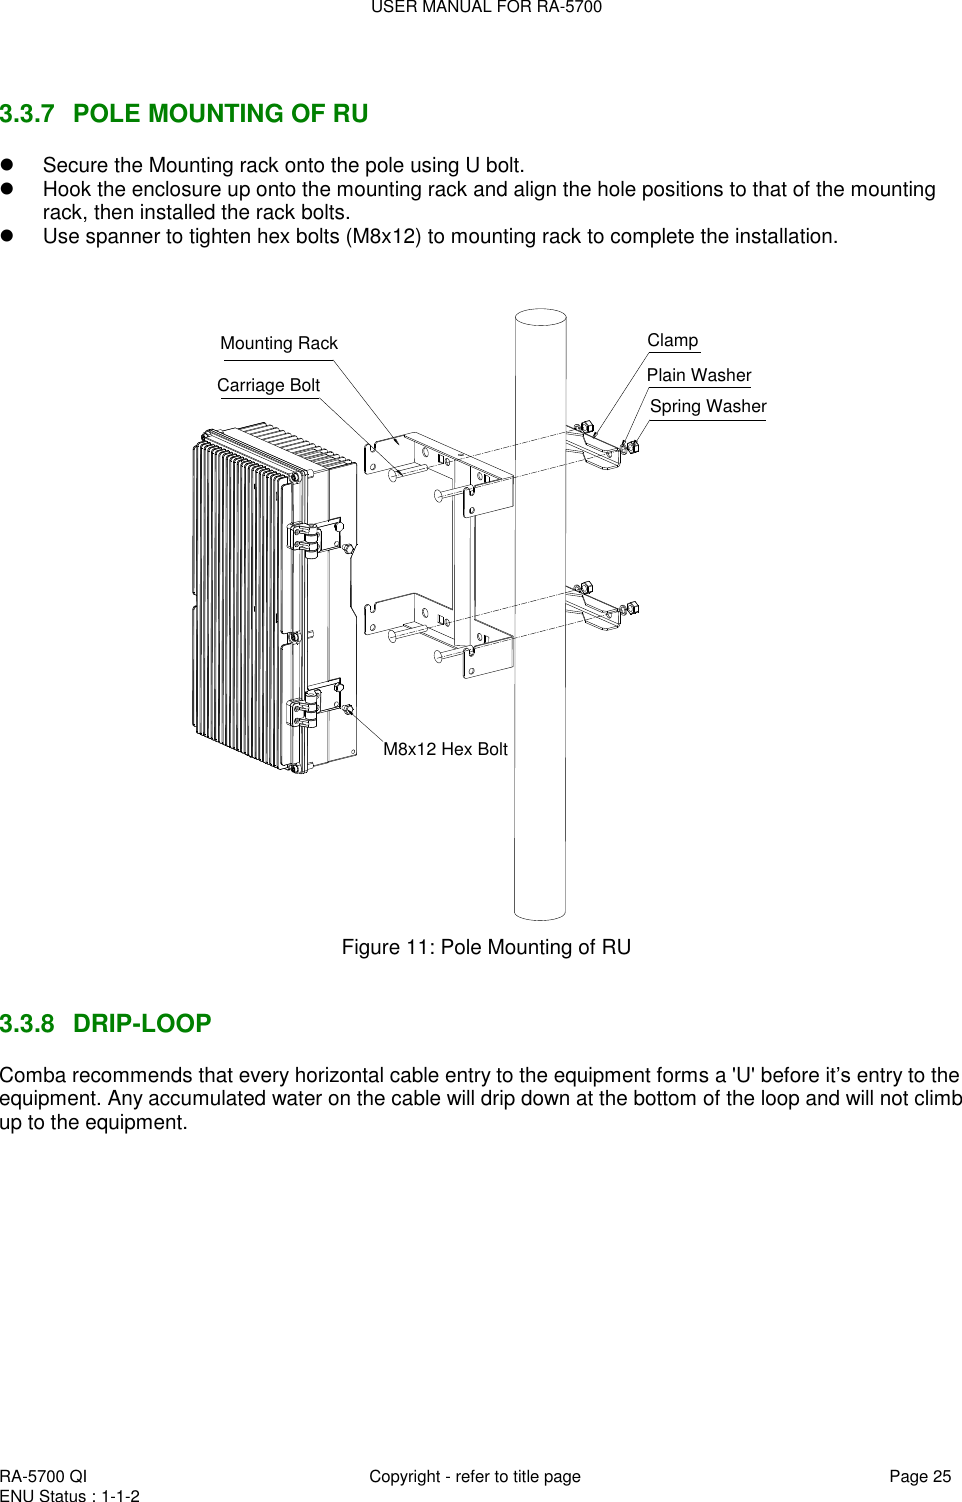 USER MANUAL FOR RA-5700  RA-5700 QI  Copyright - refer to title page Page 25 ENU Status : 1-1-2     3.3.7  POLE MOUNTING OF RU   Secure the Mounting rack onto the pole using U bolt.    Hook the enclosure up onto the mounting rack and align the hole positions to that of the mounting rack, then installed the rack bolts.   Use spanner to tighten hex bolts (M8x12) to mounting rack to complete the installation.  Mounting RackCarriage BoltClampPlain WasherSpring WasherM8x12 Hex Bolt Figure 11: Pole Mounting of RU    3.3.8  DRIP-LOOP Comba recommends that every horizontal cable entry to the equipment forms a &apos;U&apos; before it‟s entry to the equipment. Any accumulated water on the cable will drip down at the bottom of the loop and will not climb up to the equipment.   